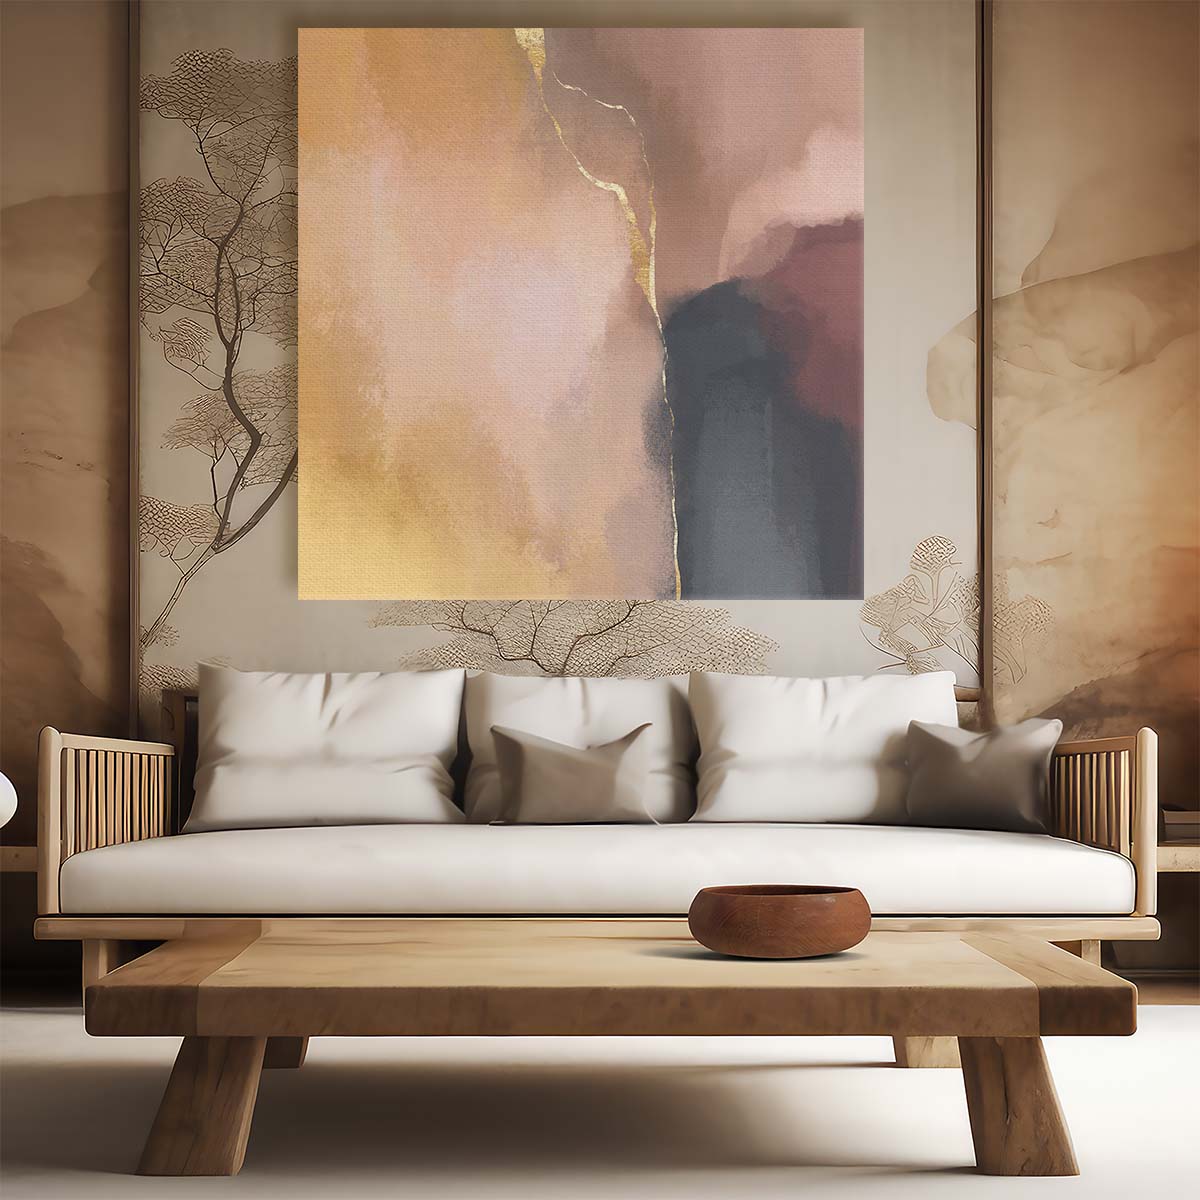 Abstract Golden and Black Paint Splash Canvas Wall Art Illustration by Luxuriance Designs. Made in USA.